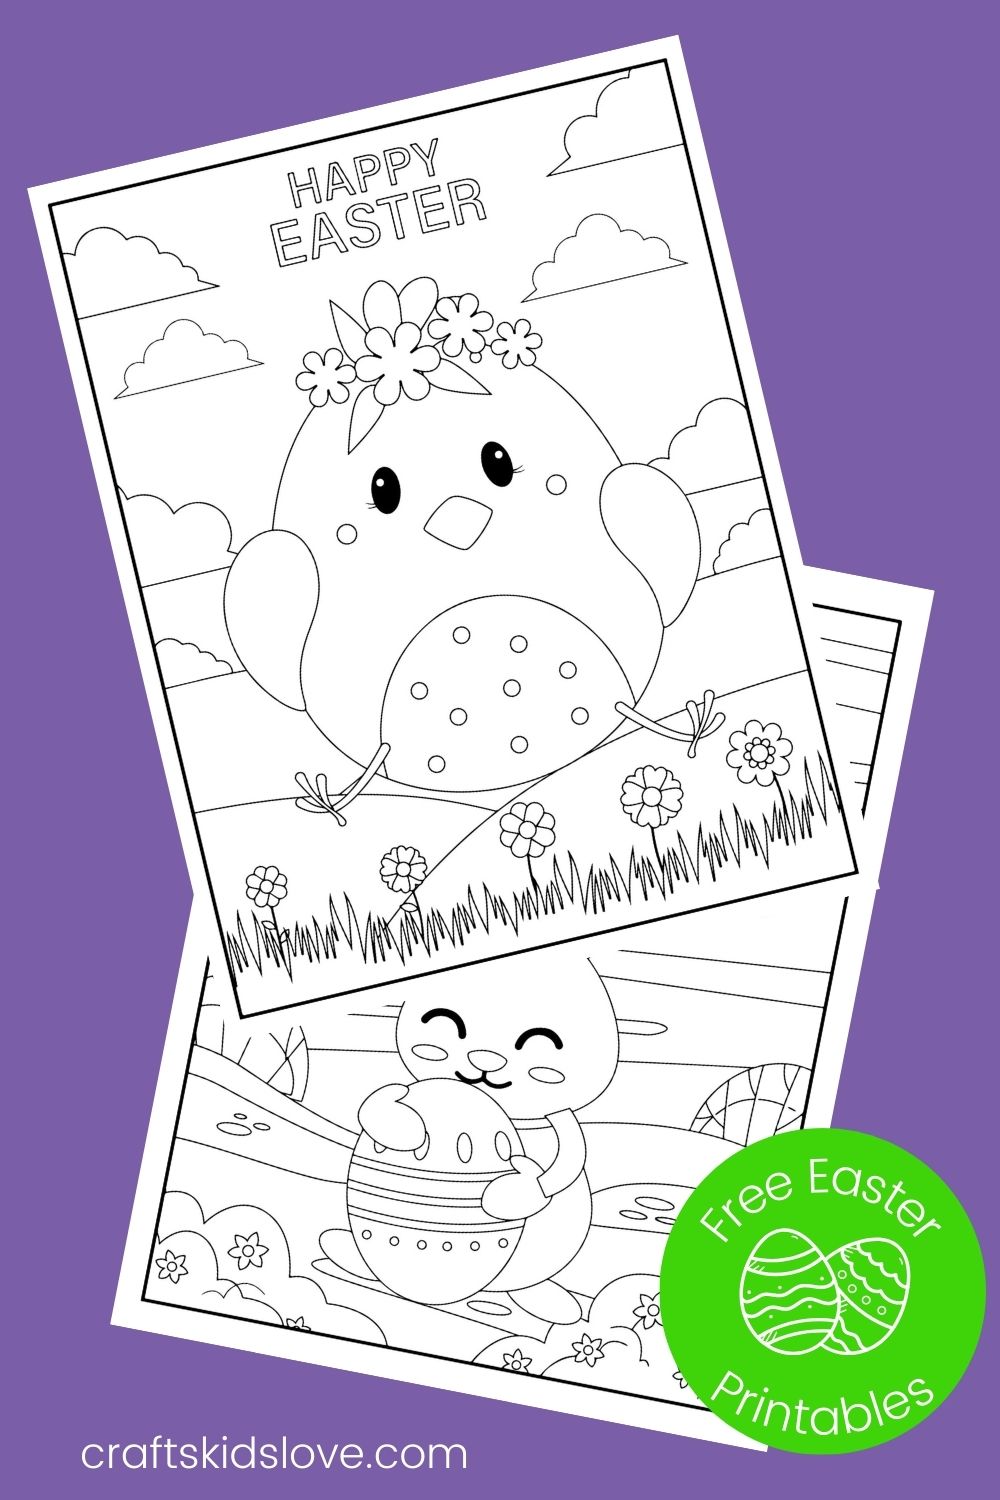 Happy Easter coloring sheets